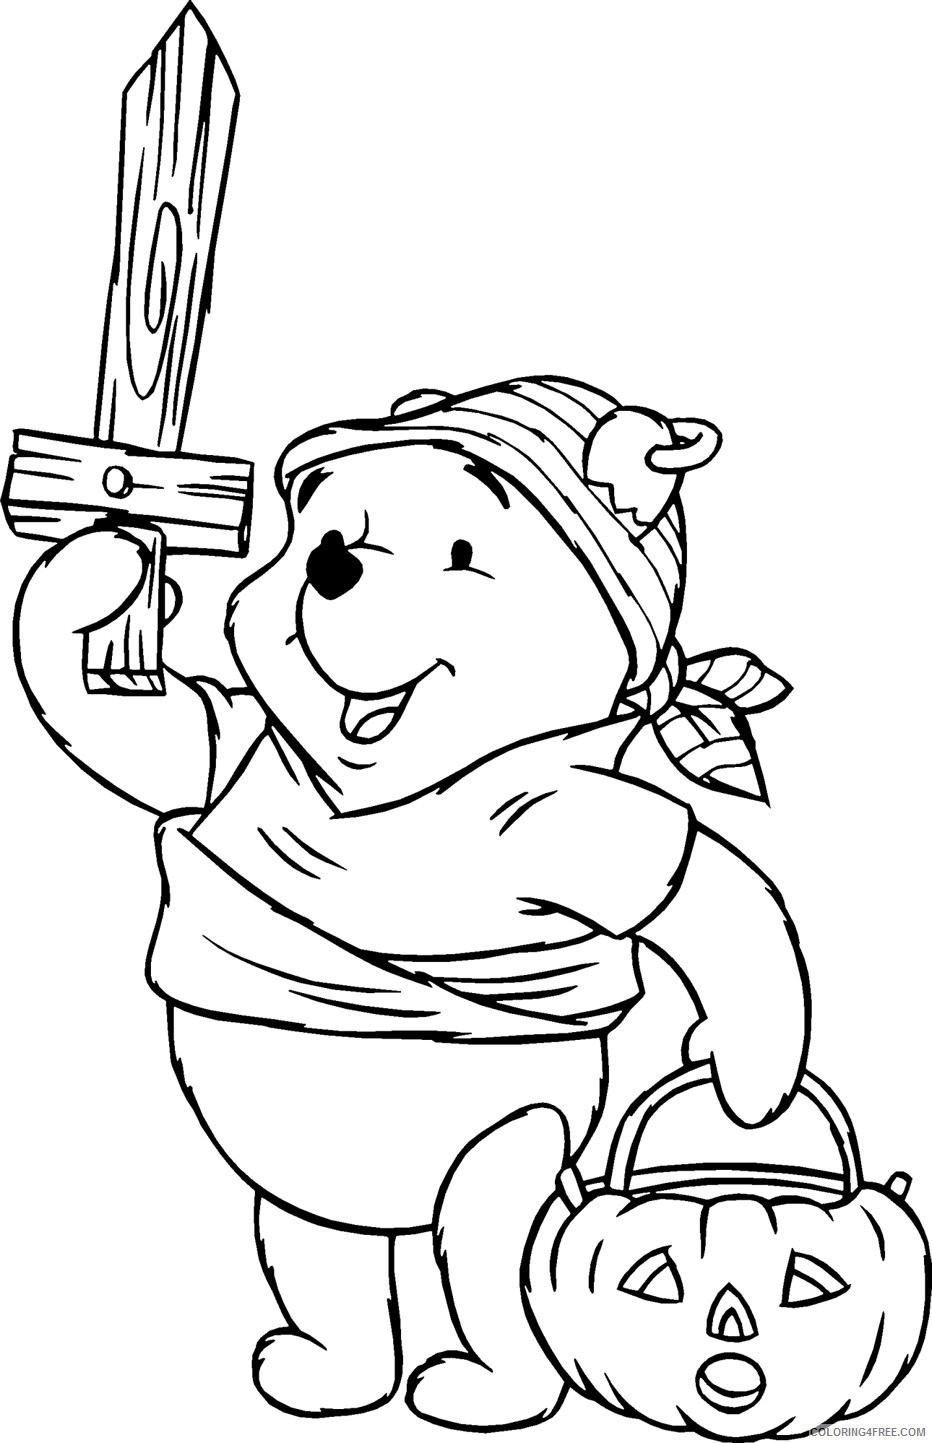 Winnie the Pooh Coloring Pages Cartoons Winnie The Pooh Printable 2020 7072 Coloring4free